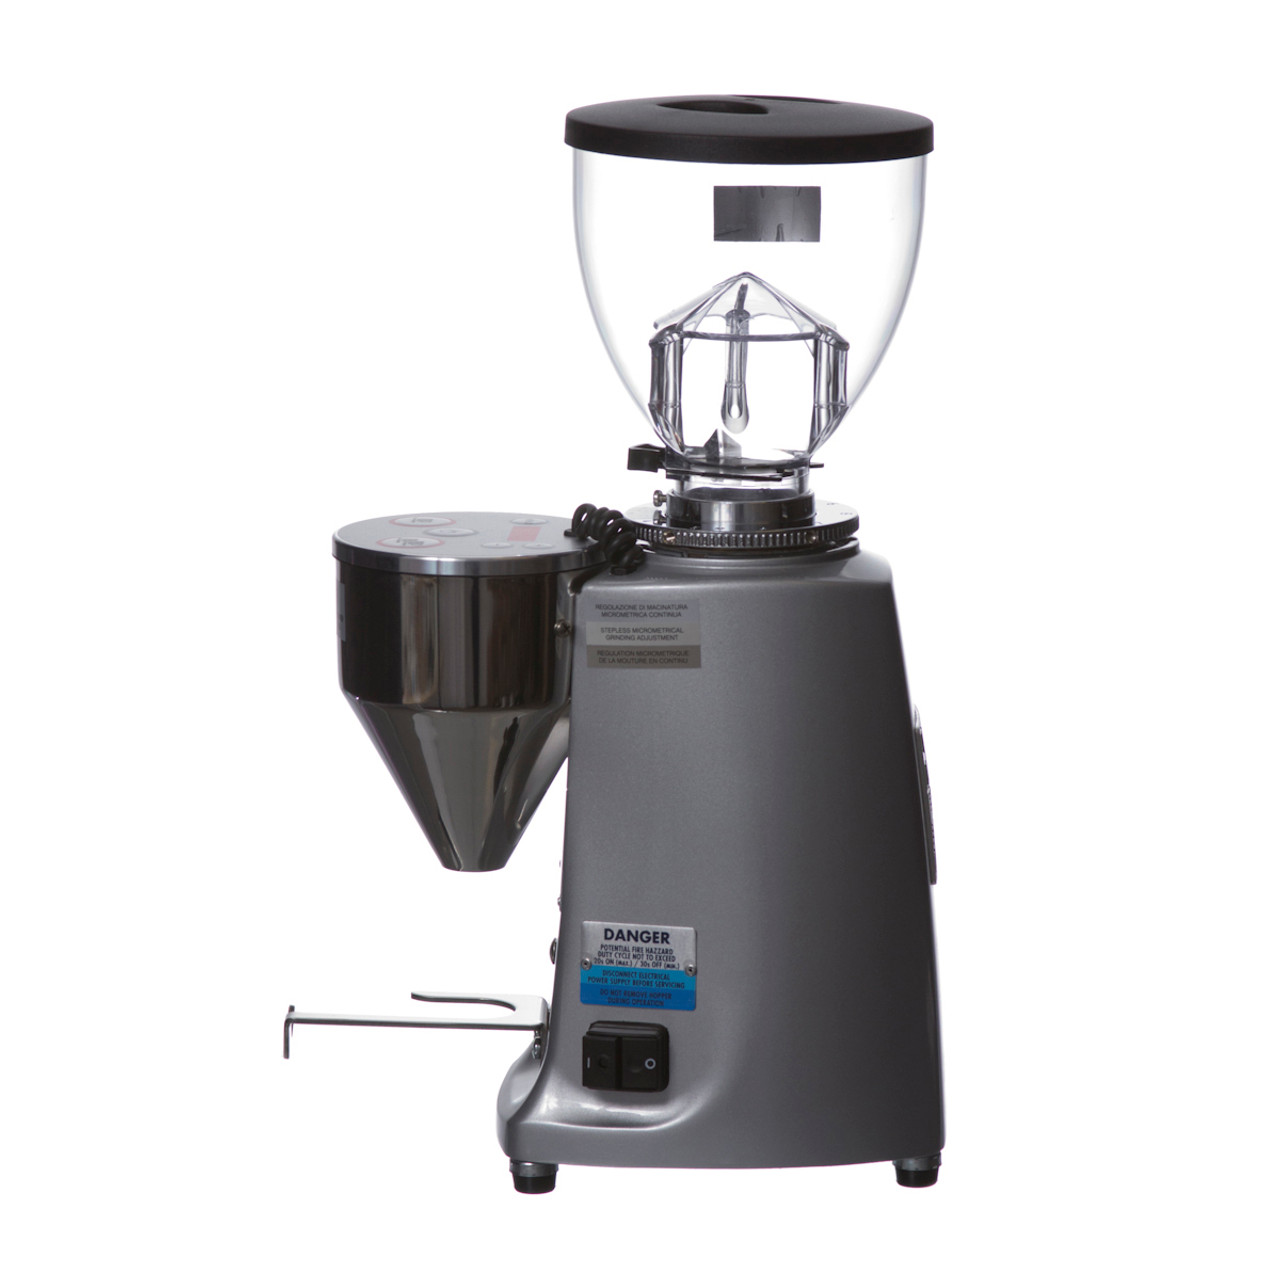 MAZZER MINI B ELECTRONIC - YOUR COMPACT SIZED COMMERCIAL COFFEE